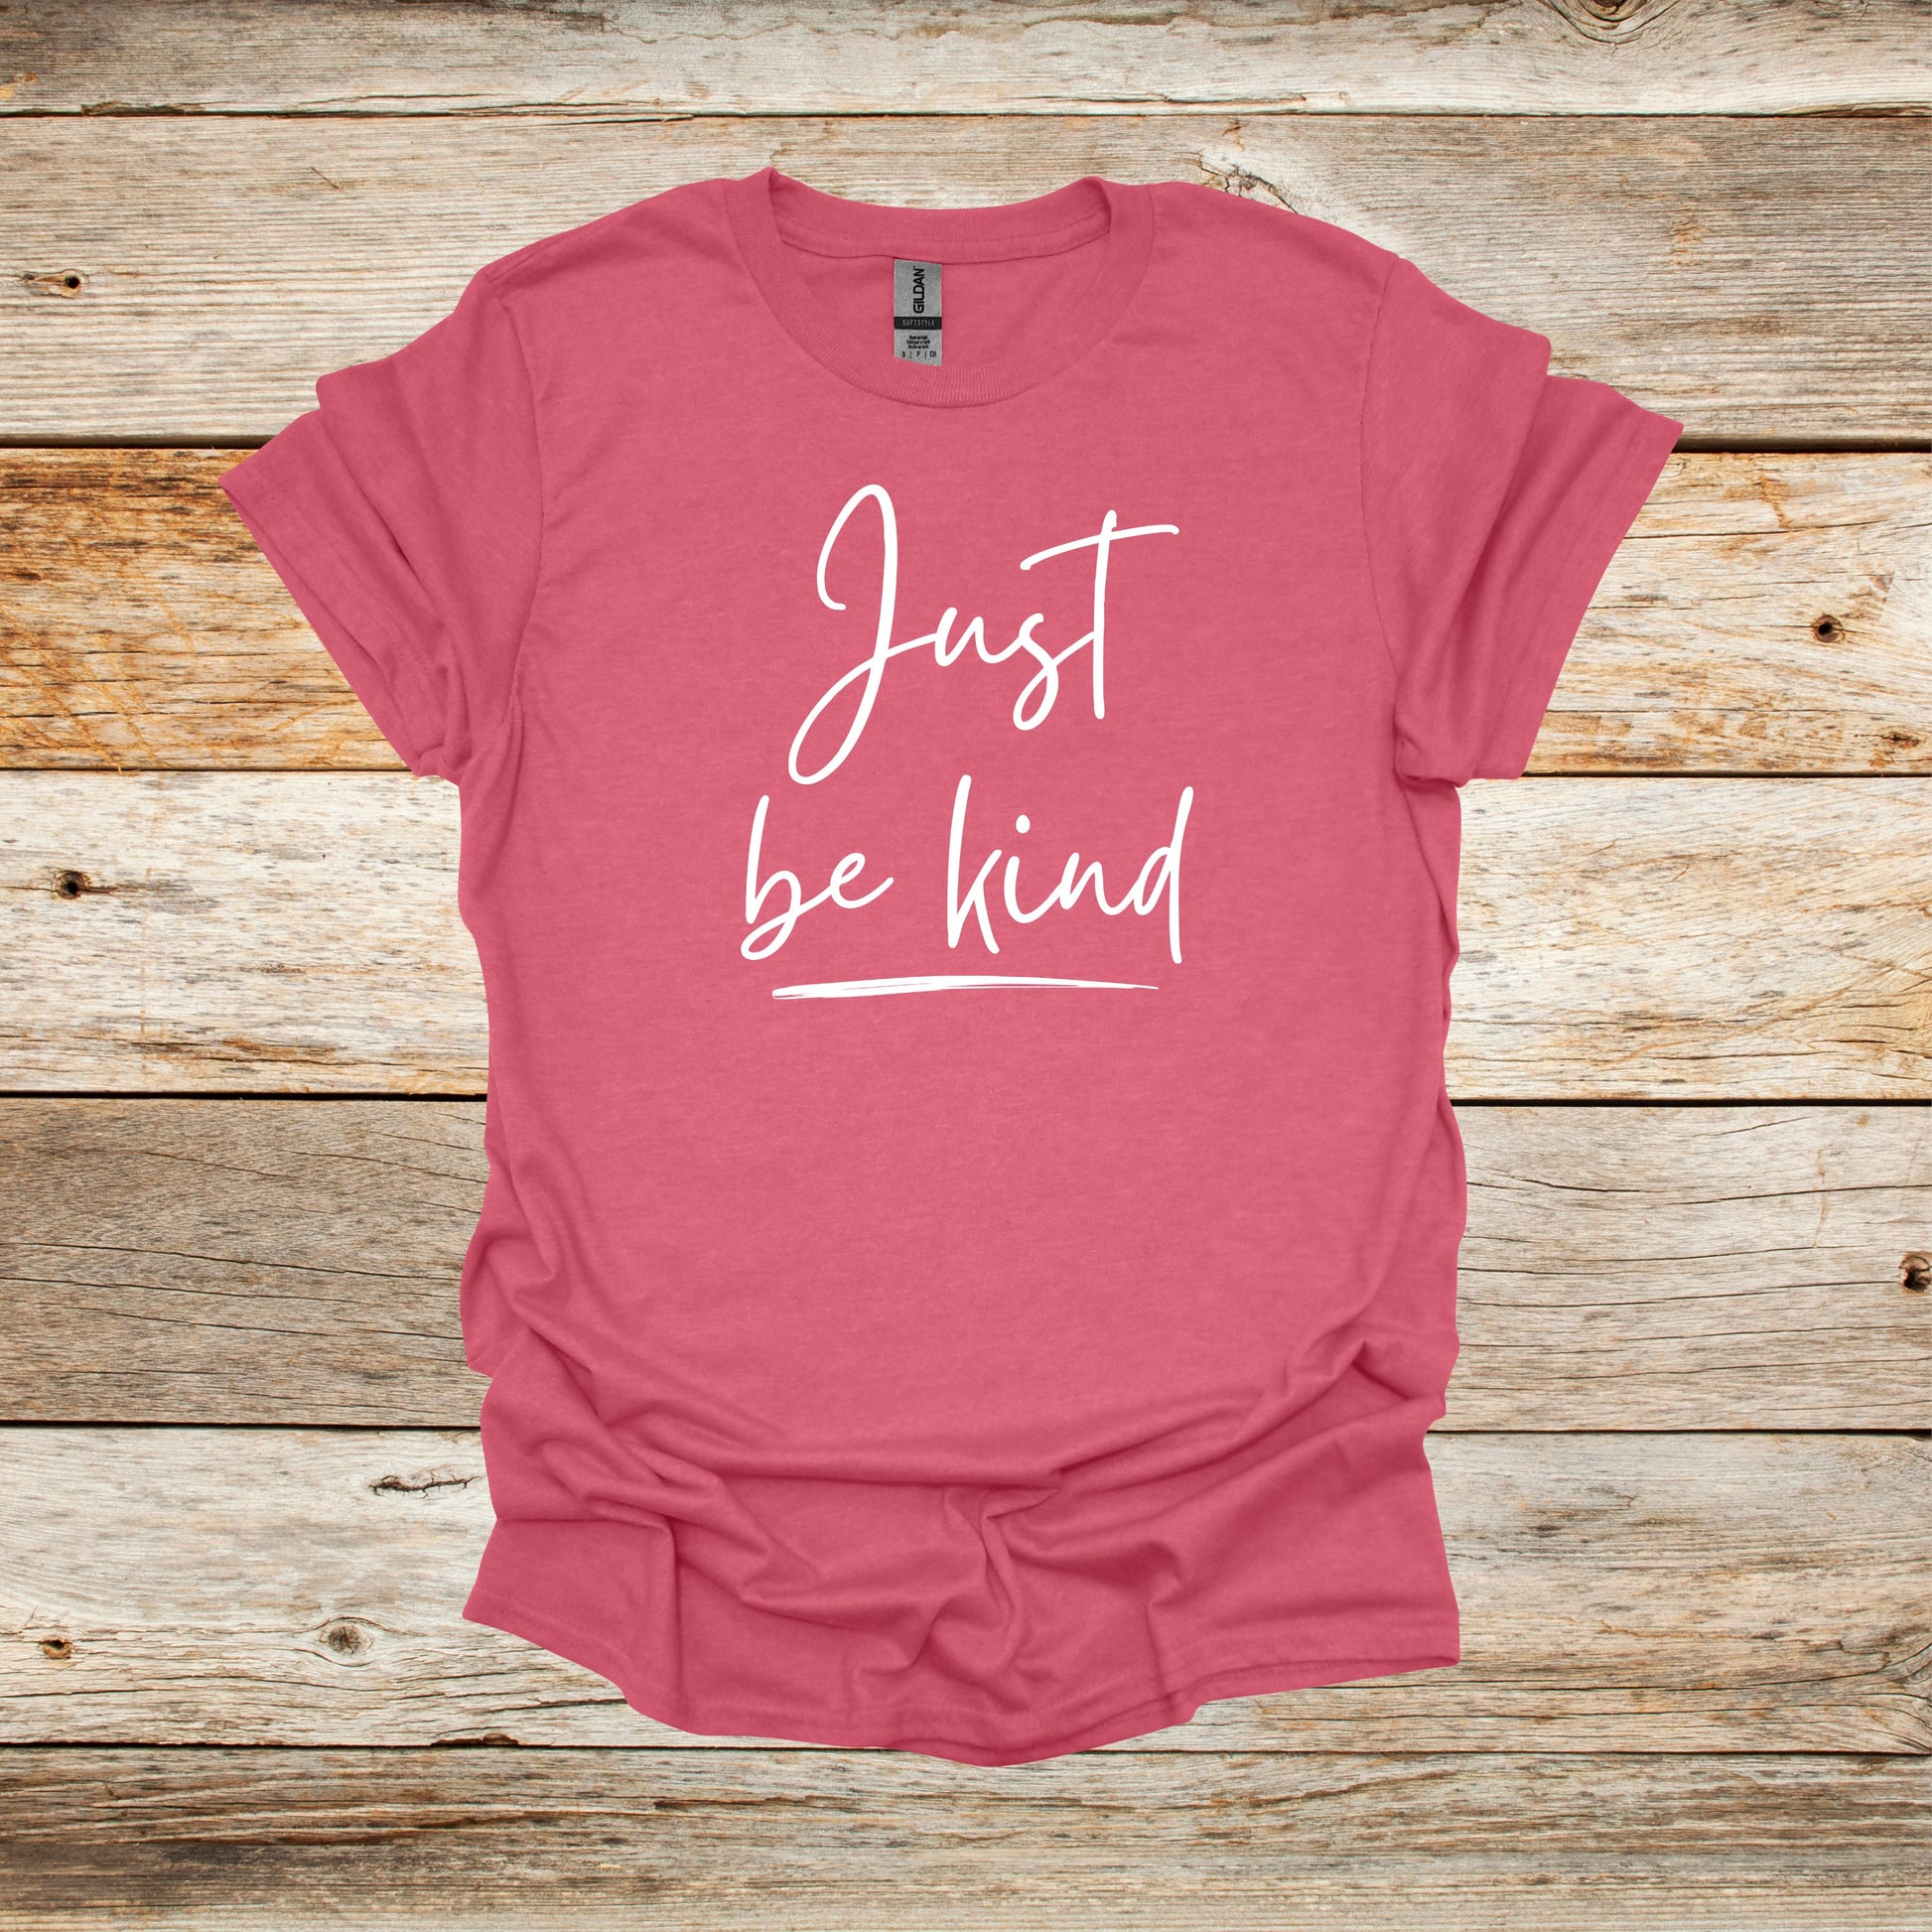 Sayings T-Shirt - Just Be Kind - Men's and Women's Tee Shirts - Sayings T-Shirts Graphic Avenue Heather Cardinal Red Adult Small 